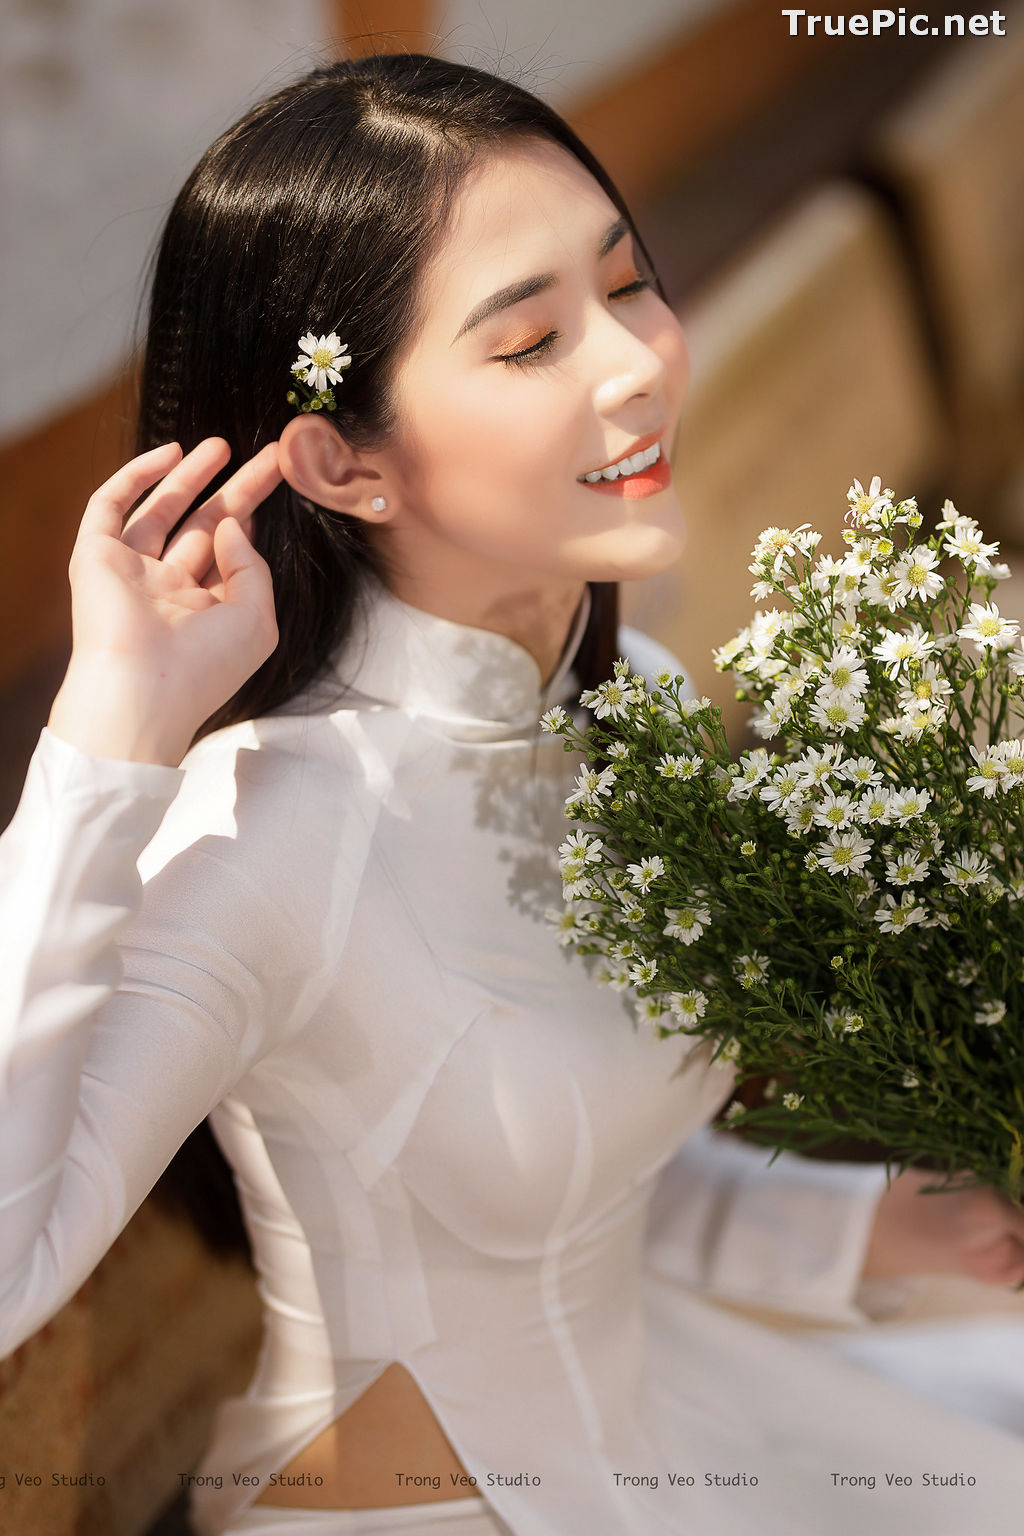 Image The Beauty of Vietnamese Girls with Traditional Dress (Ao Dai) #2 - TruePic.net - Picture-12